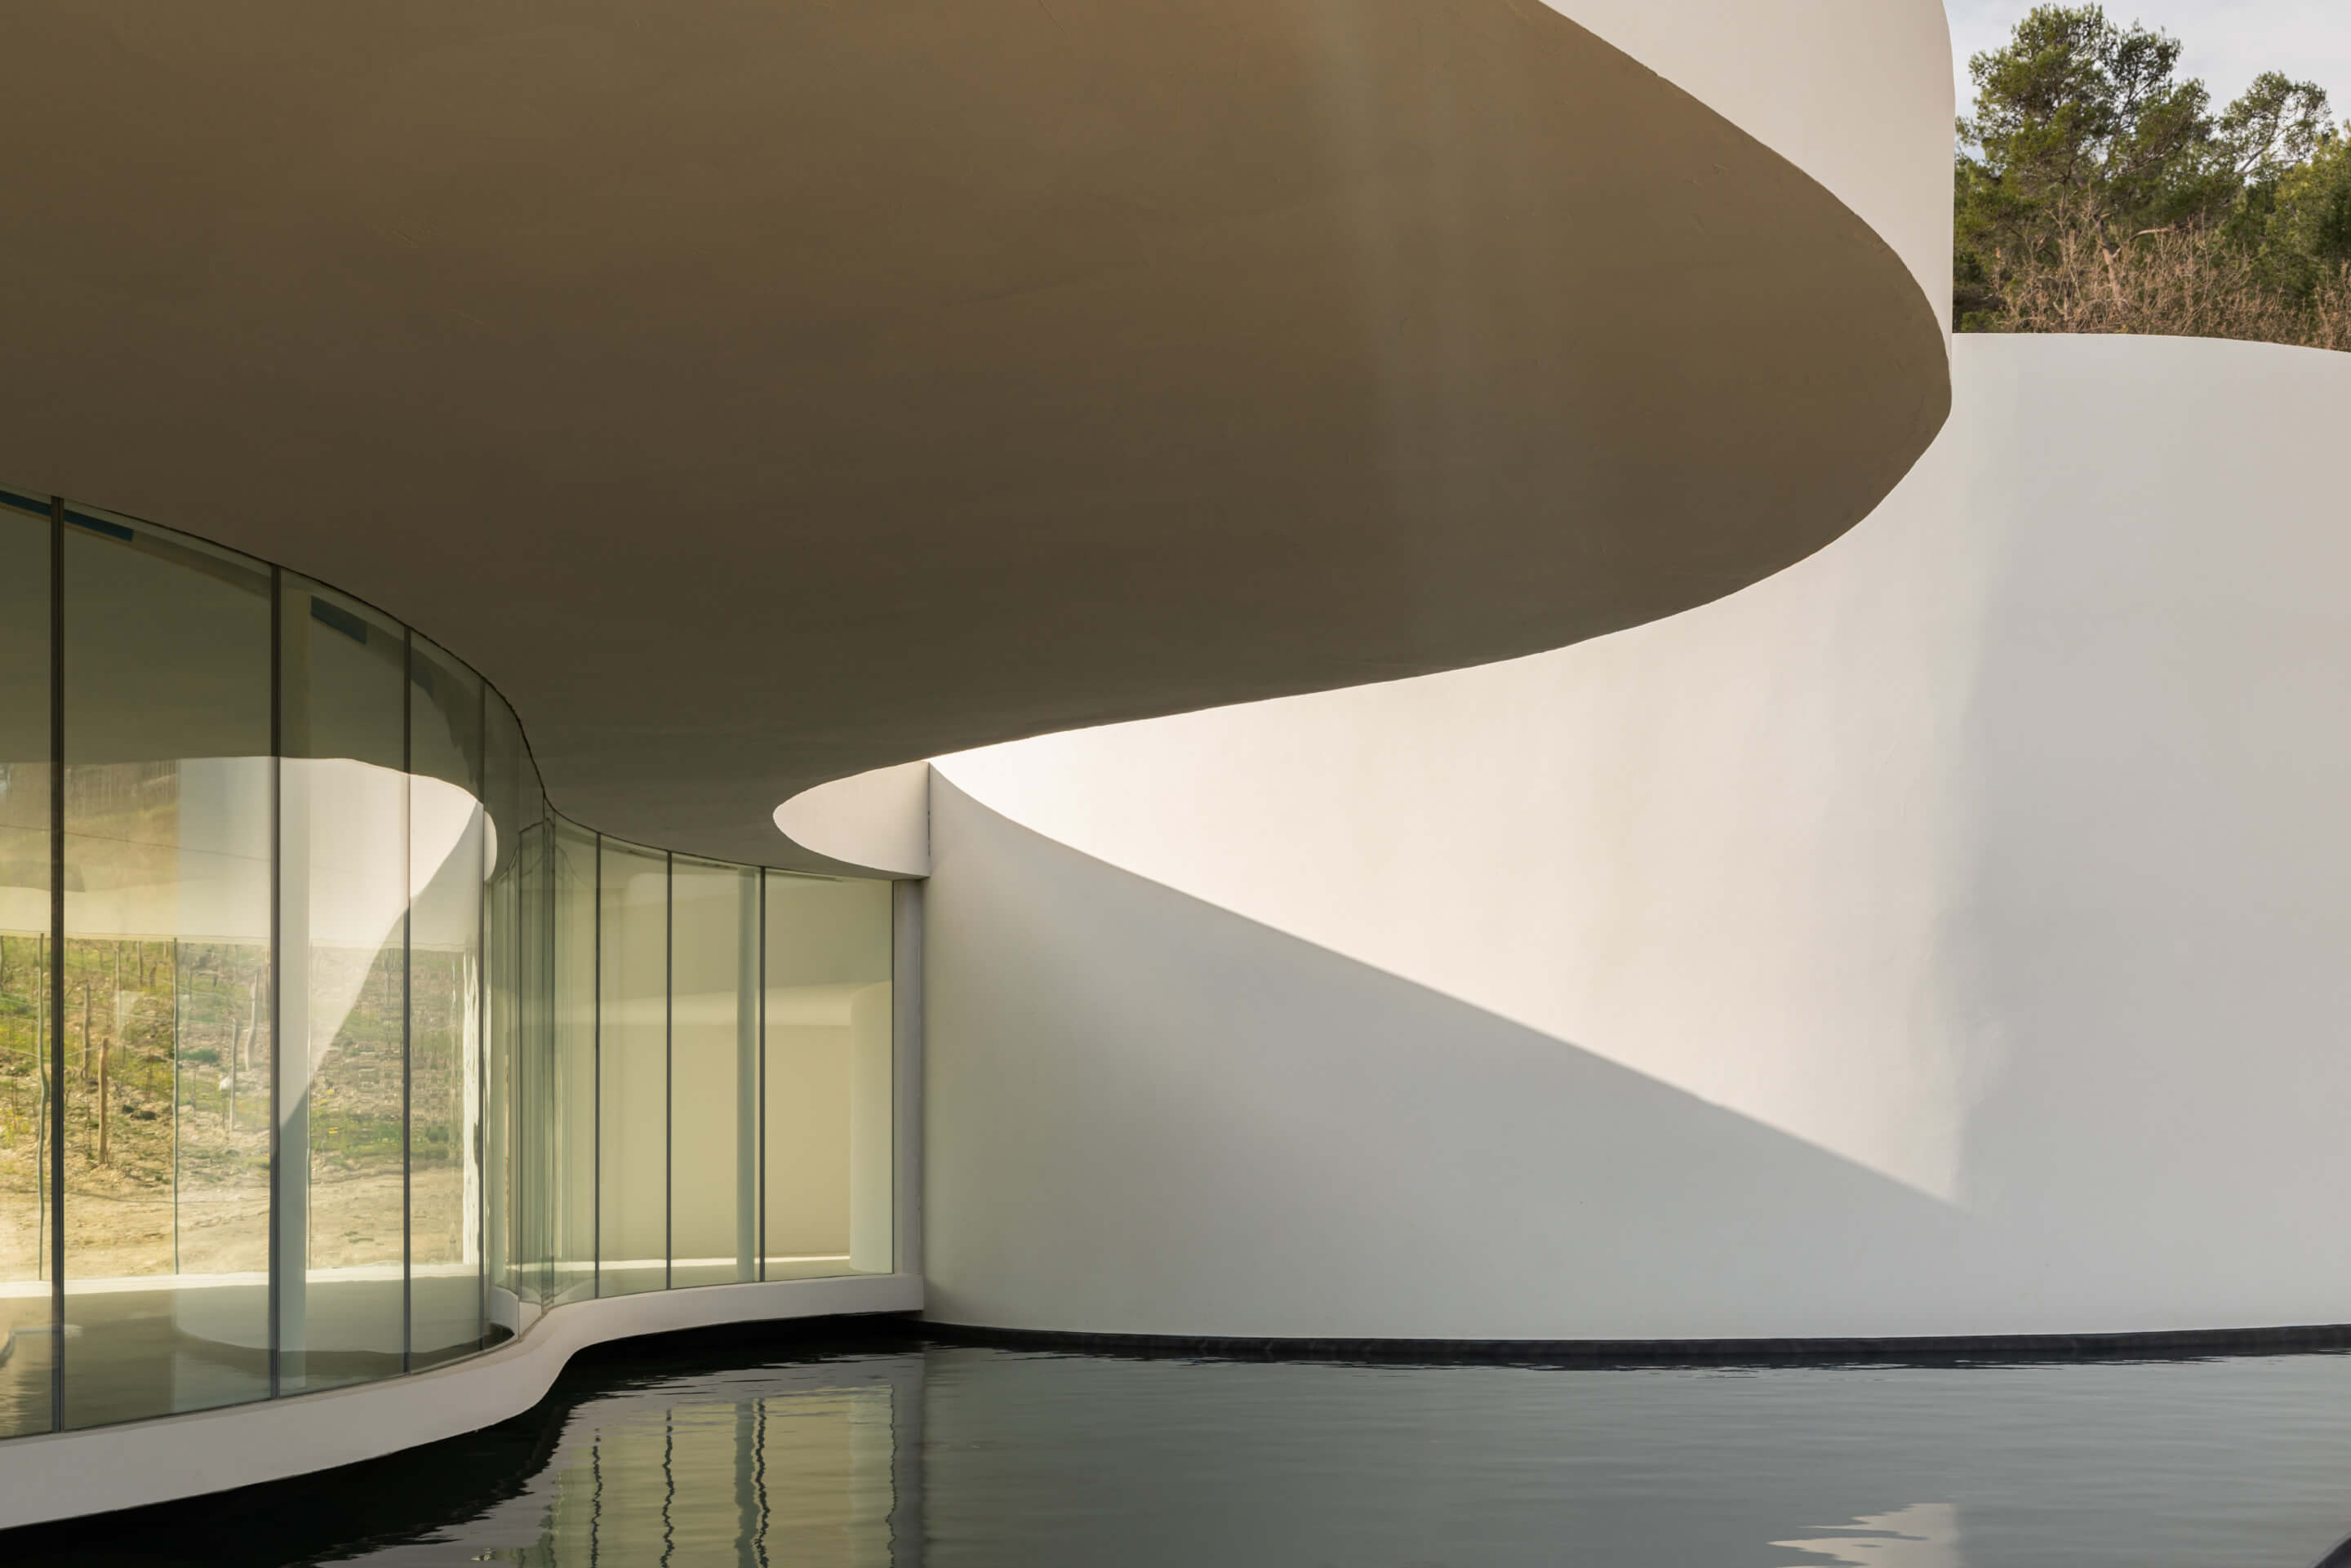 a curvy gallery space looking out to a reflecting pool